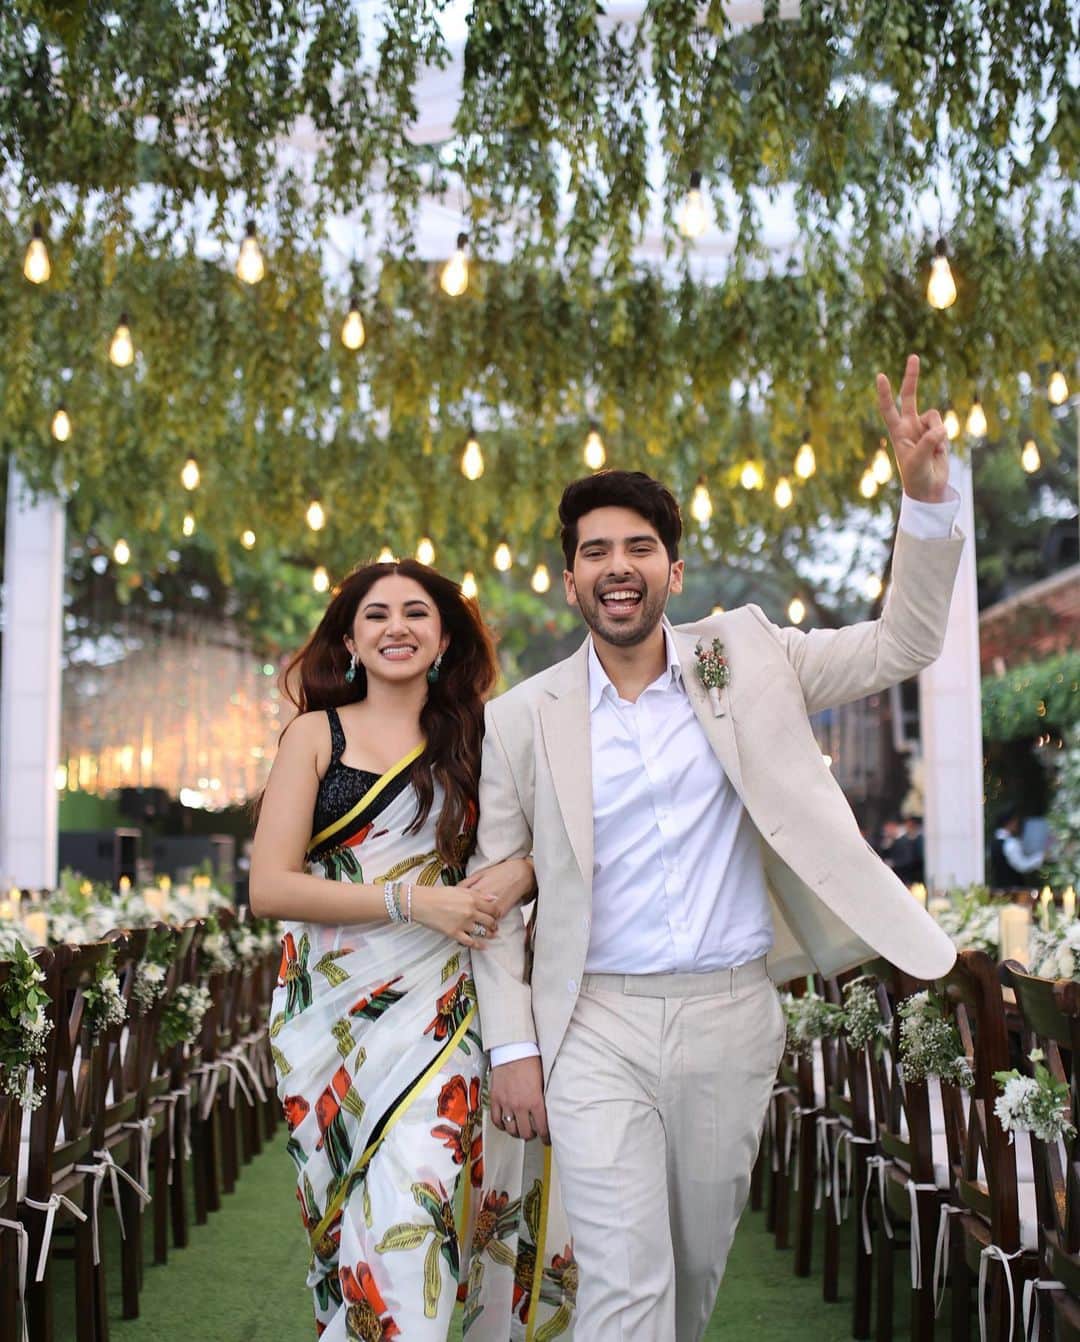 Aashna Shroffのインスタグラム：「I remember, a few years ago, when @armaanmalik and I were talking about life together, I mentioned that whenever we do get engaged, I would want to throw a little party at @gallopsmumbai to celebrate with our loved ones. At that point, even though we had no clarity on when we planned on taking this next step, the one thing I was very sure of, was where the celebration would happen. I’ve always loved Gallops, not only for how beautiful it is and because the food is impeccable, but also because @chefyajushmalik is the nicest human, and always makes us feel like we’re home. Couldn’t have imagined this special evening anywhere else 🥰」